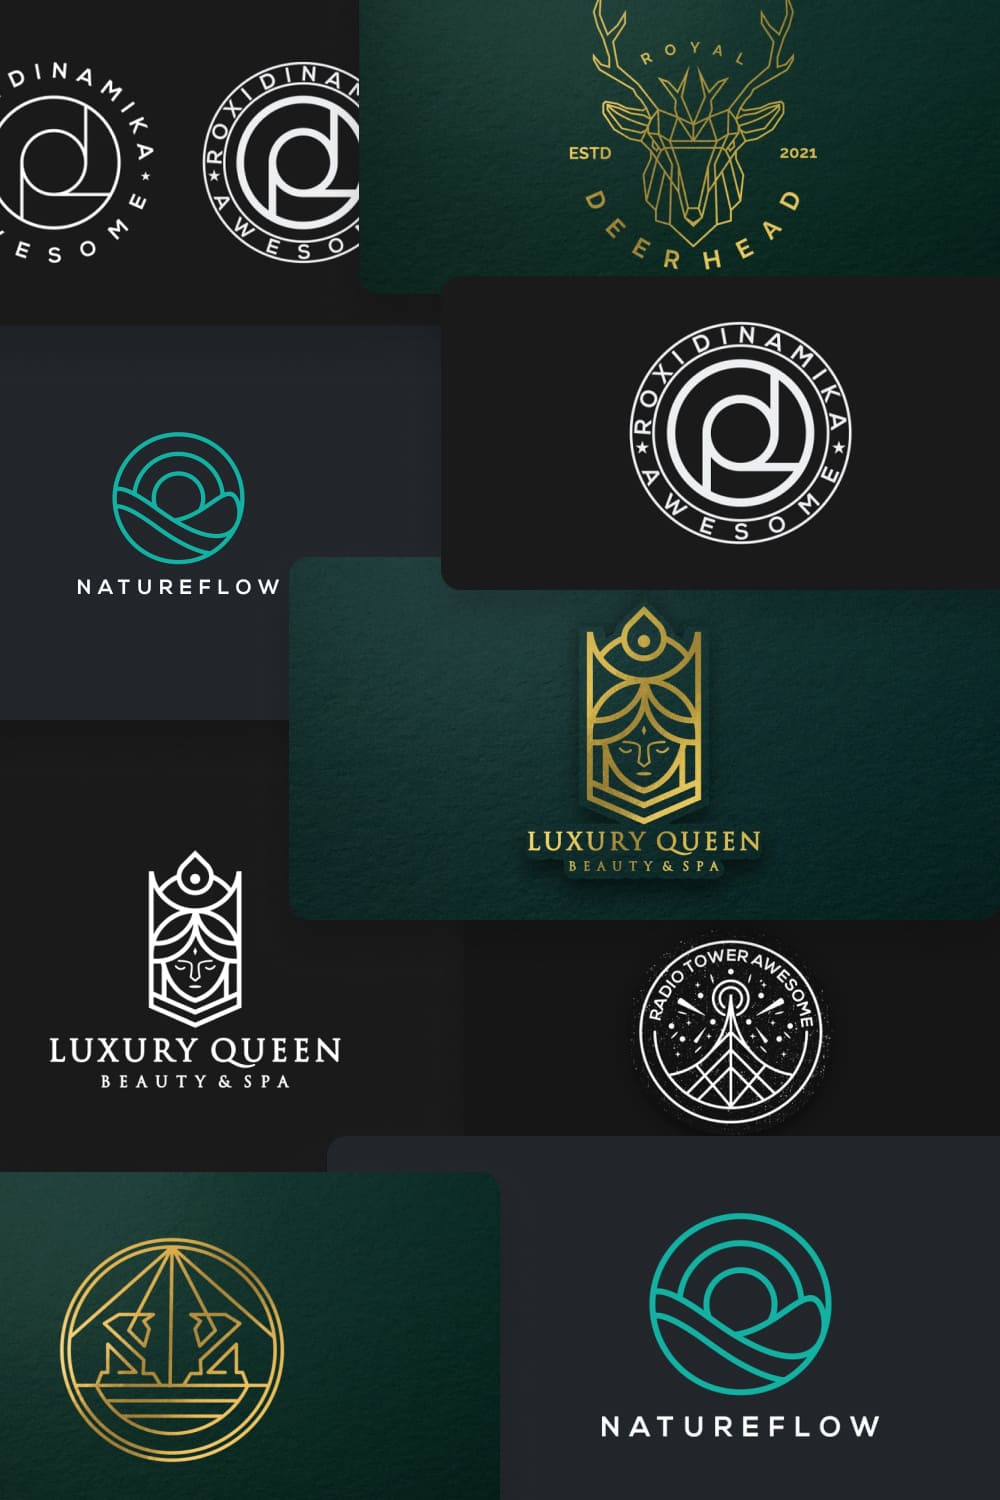 The logos are created in an ornamental style.